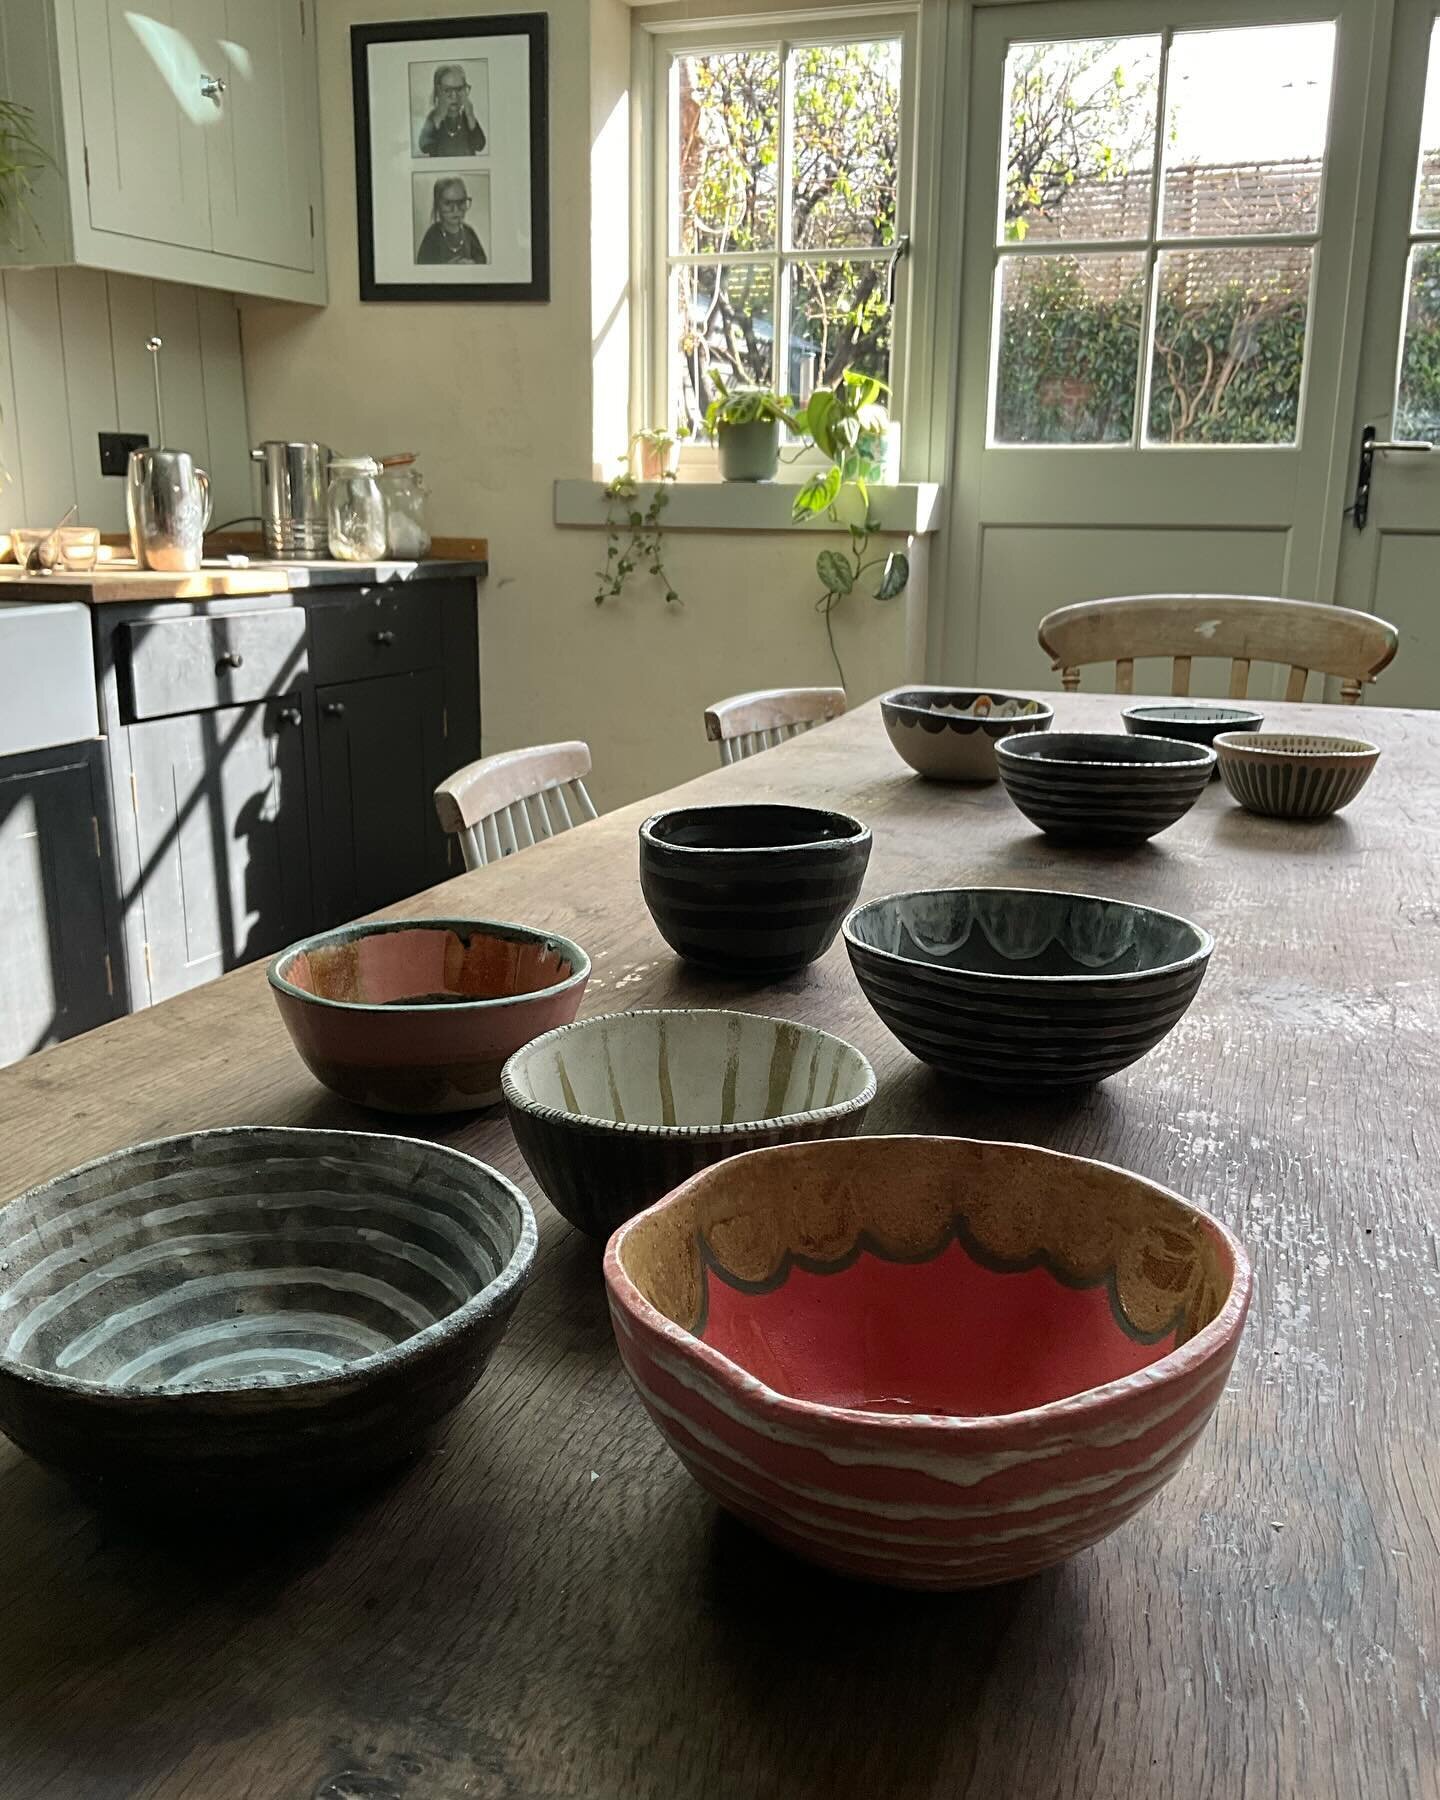 Delightful bowls fresh from the kiln this morning which will be for sale in my online shop later today together with some stoneware houses.

I have decided that I will be listing bowls and stoneware houses as and when they are finished and emerge fro